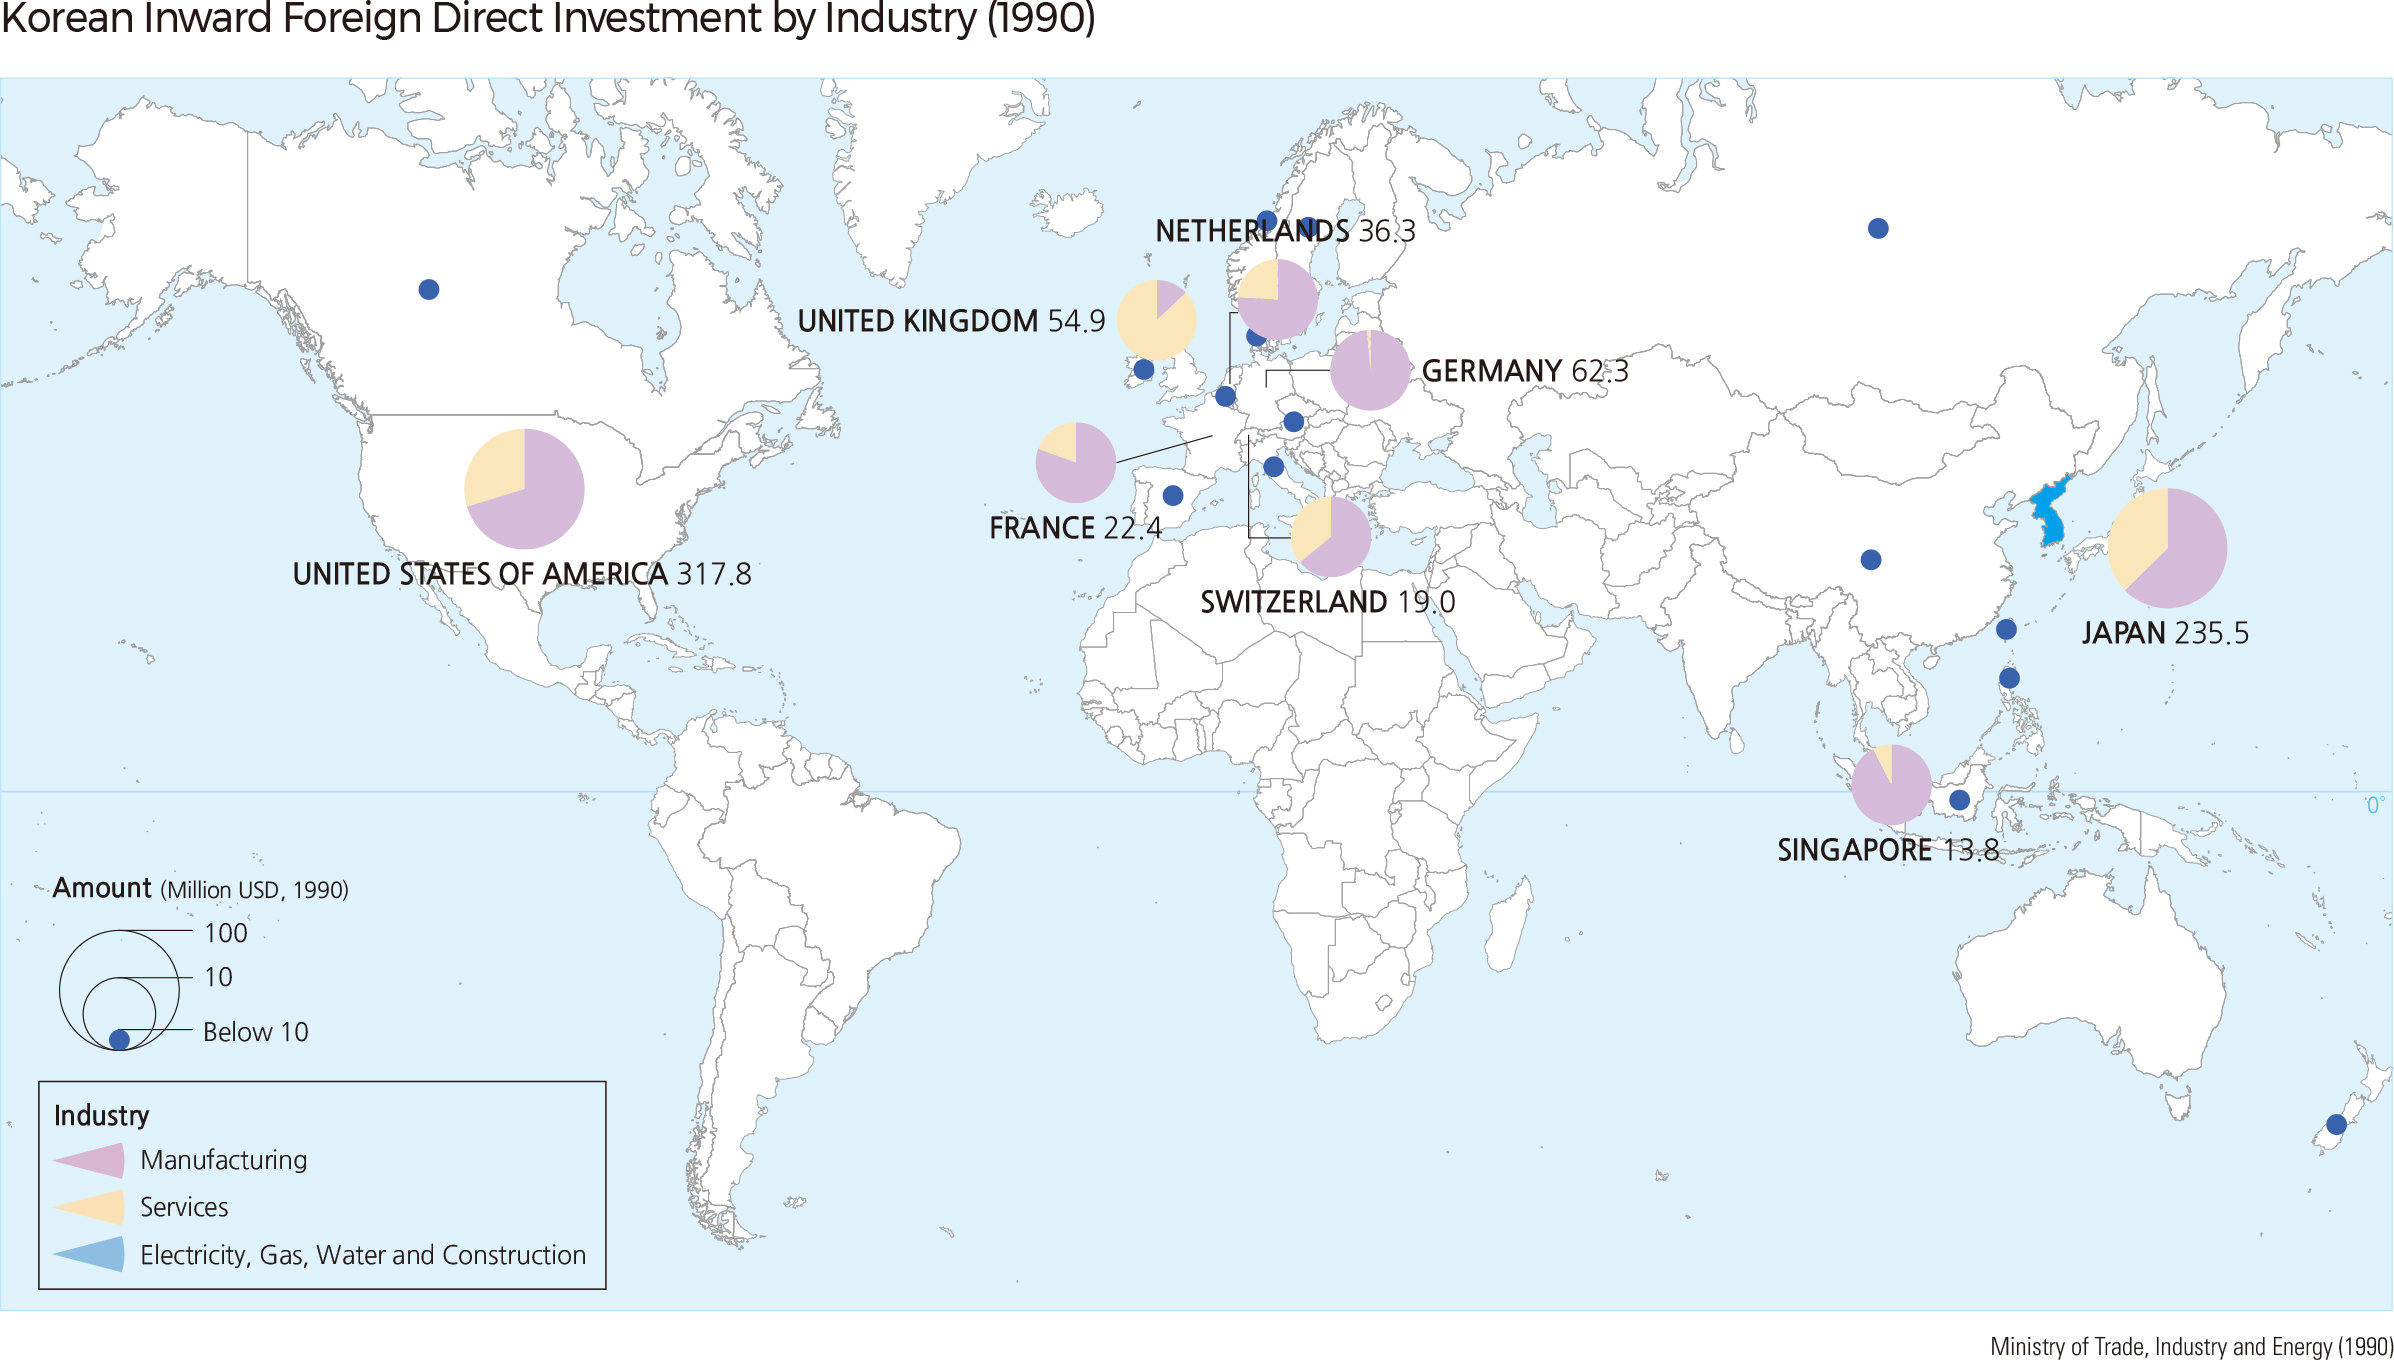  Korean Inward Foreign Direct Investment by Industry (1990)